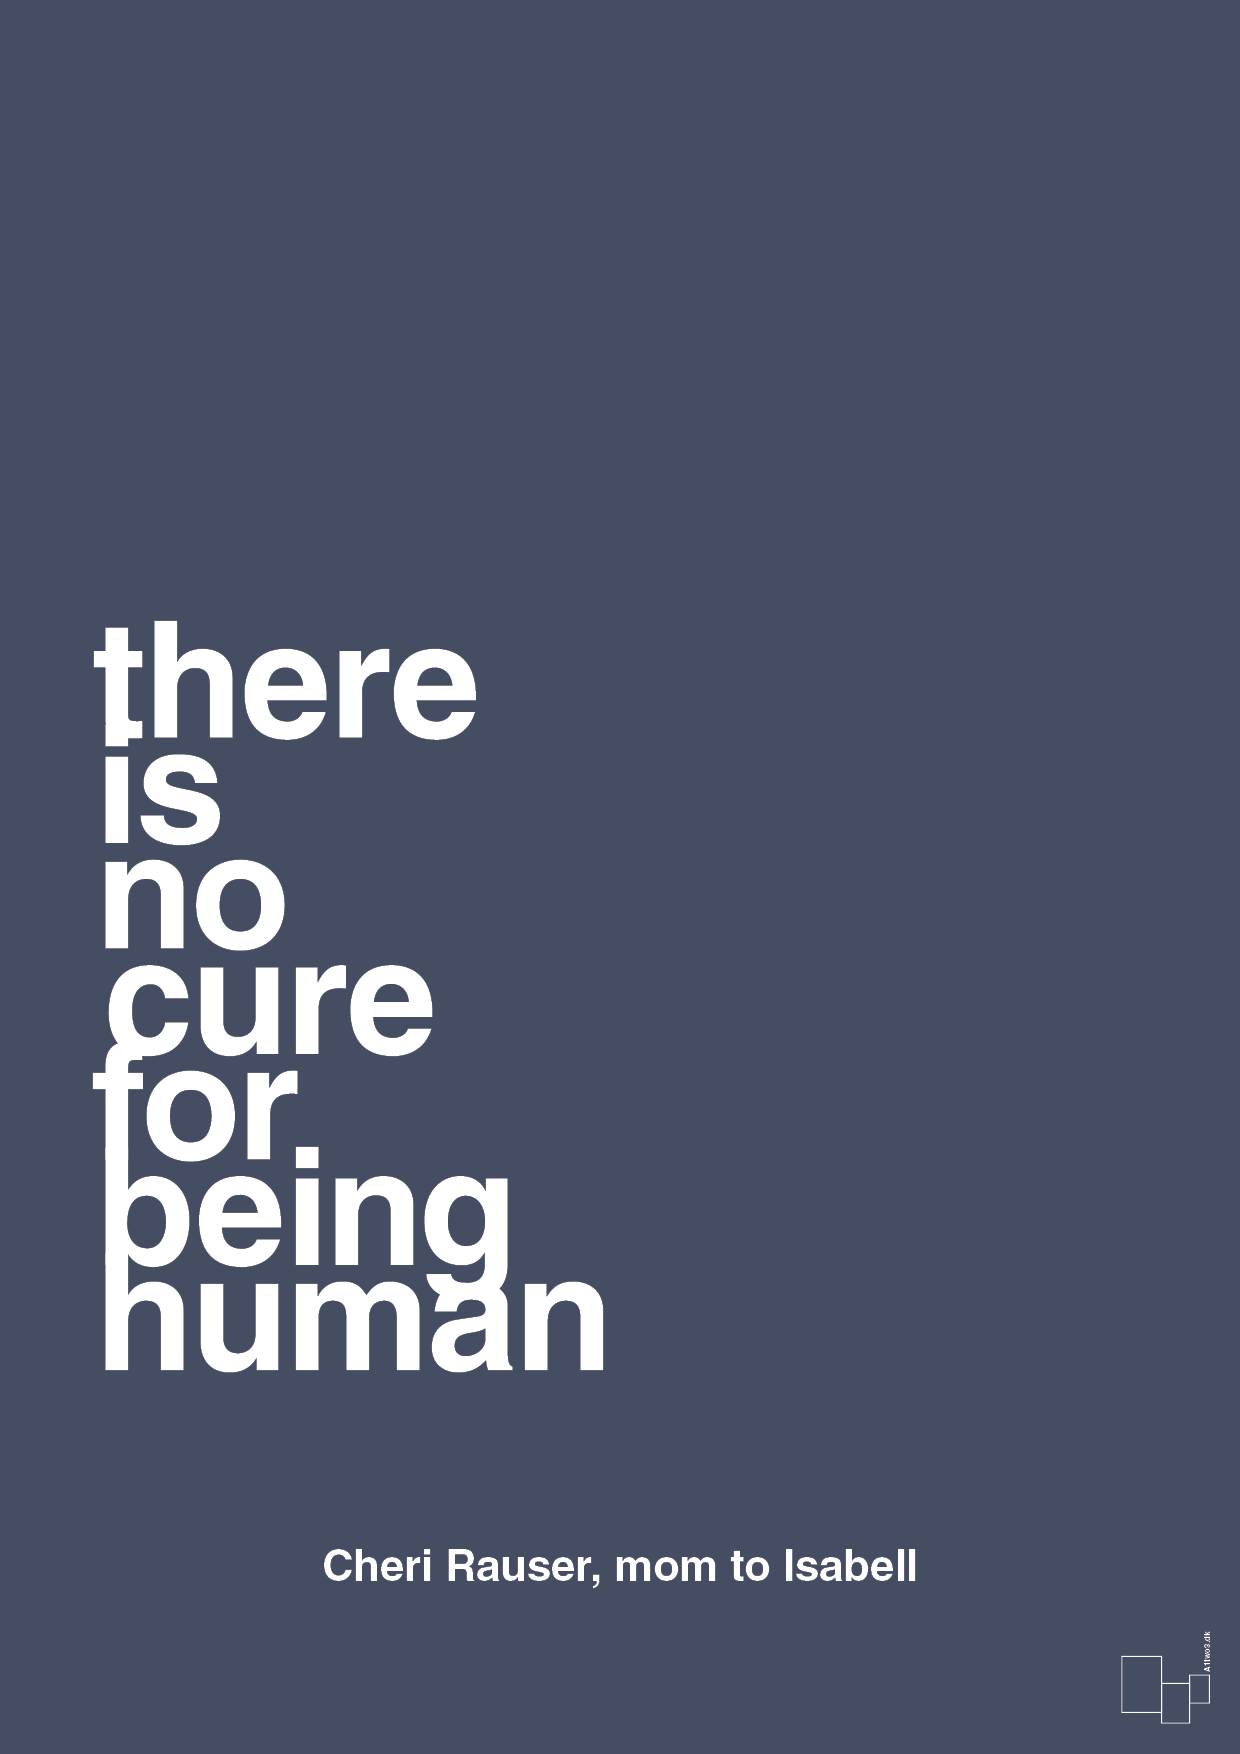 there is no cure for being human - Plakat med Samfund i Petrol